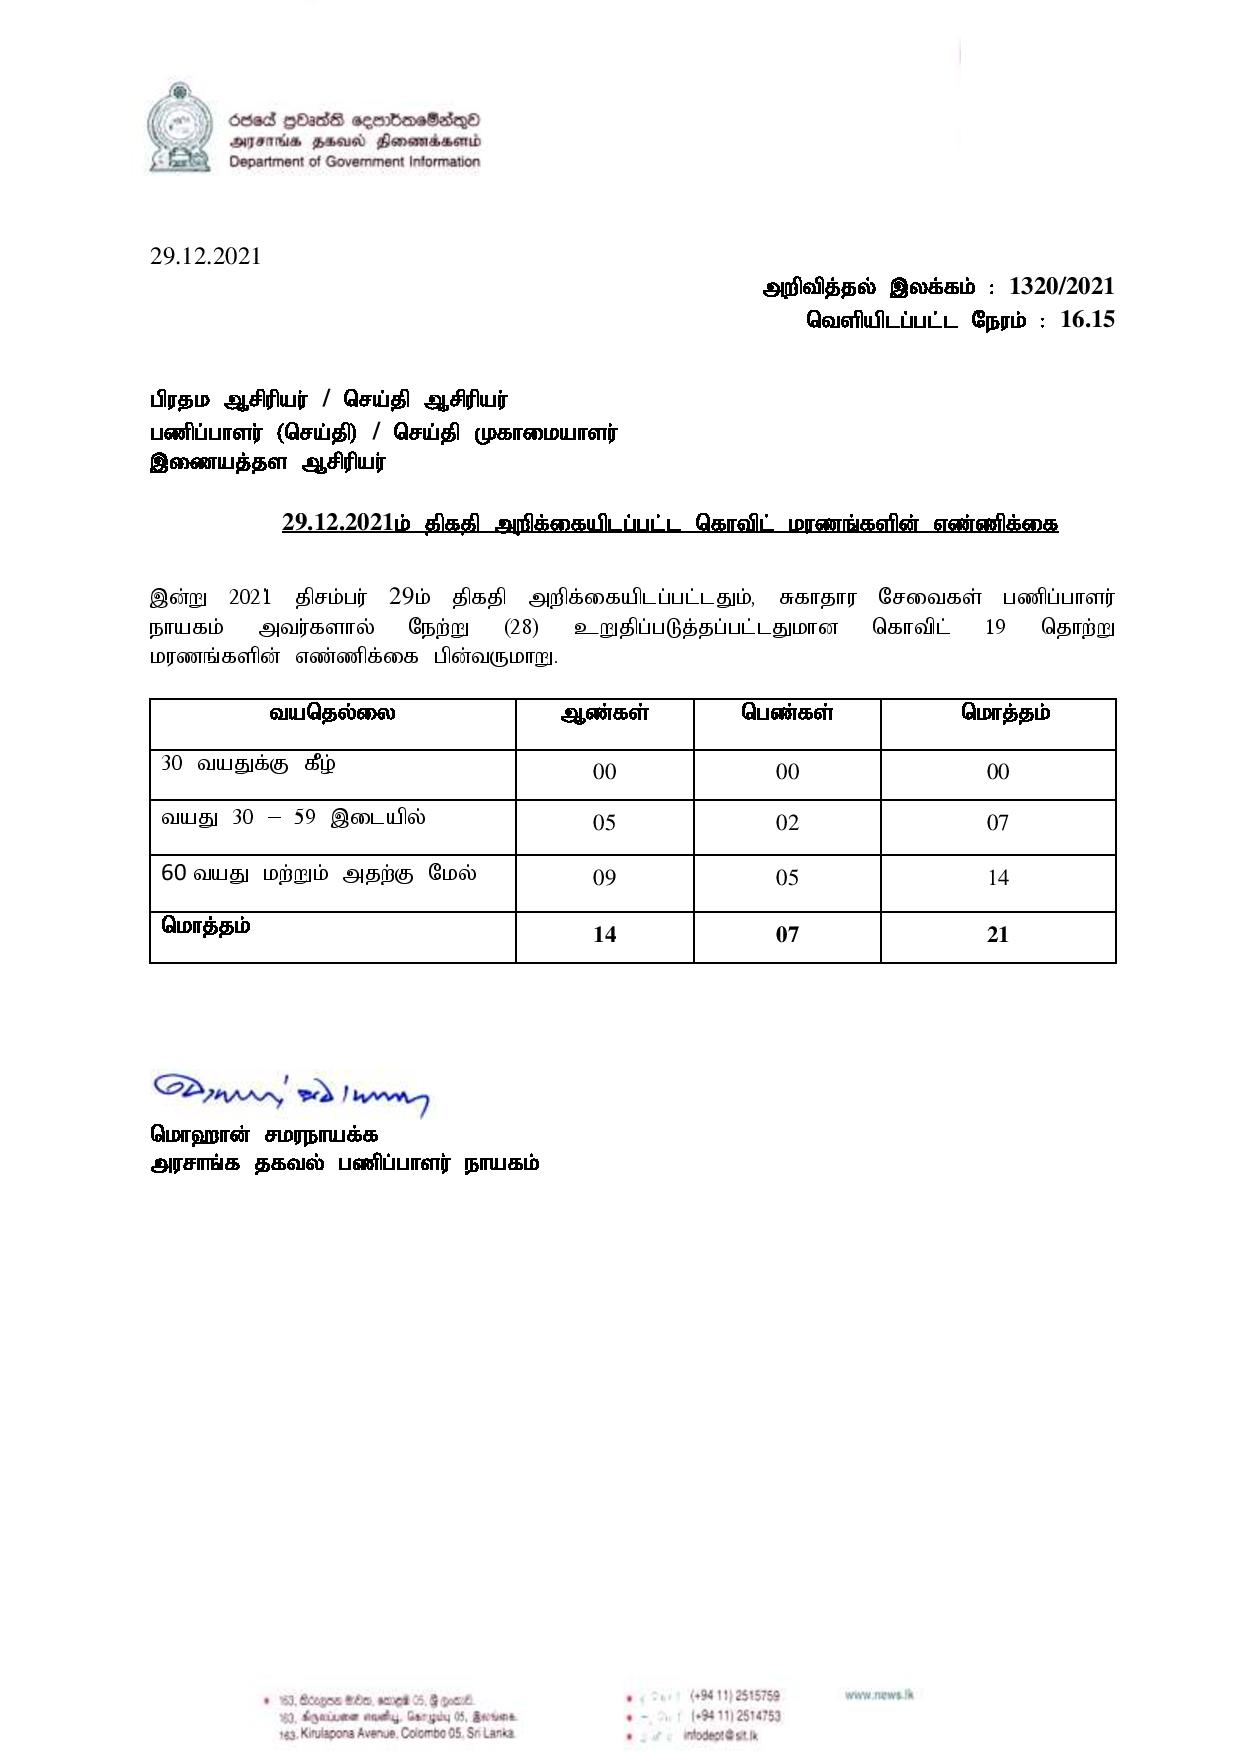 Release No 1320 Tamil page 001